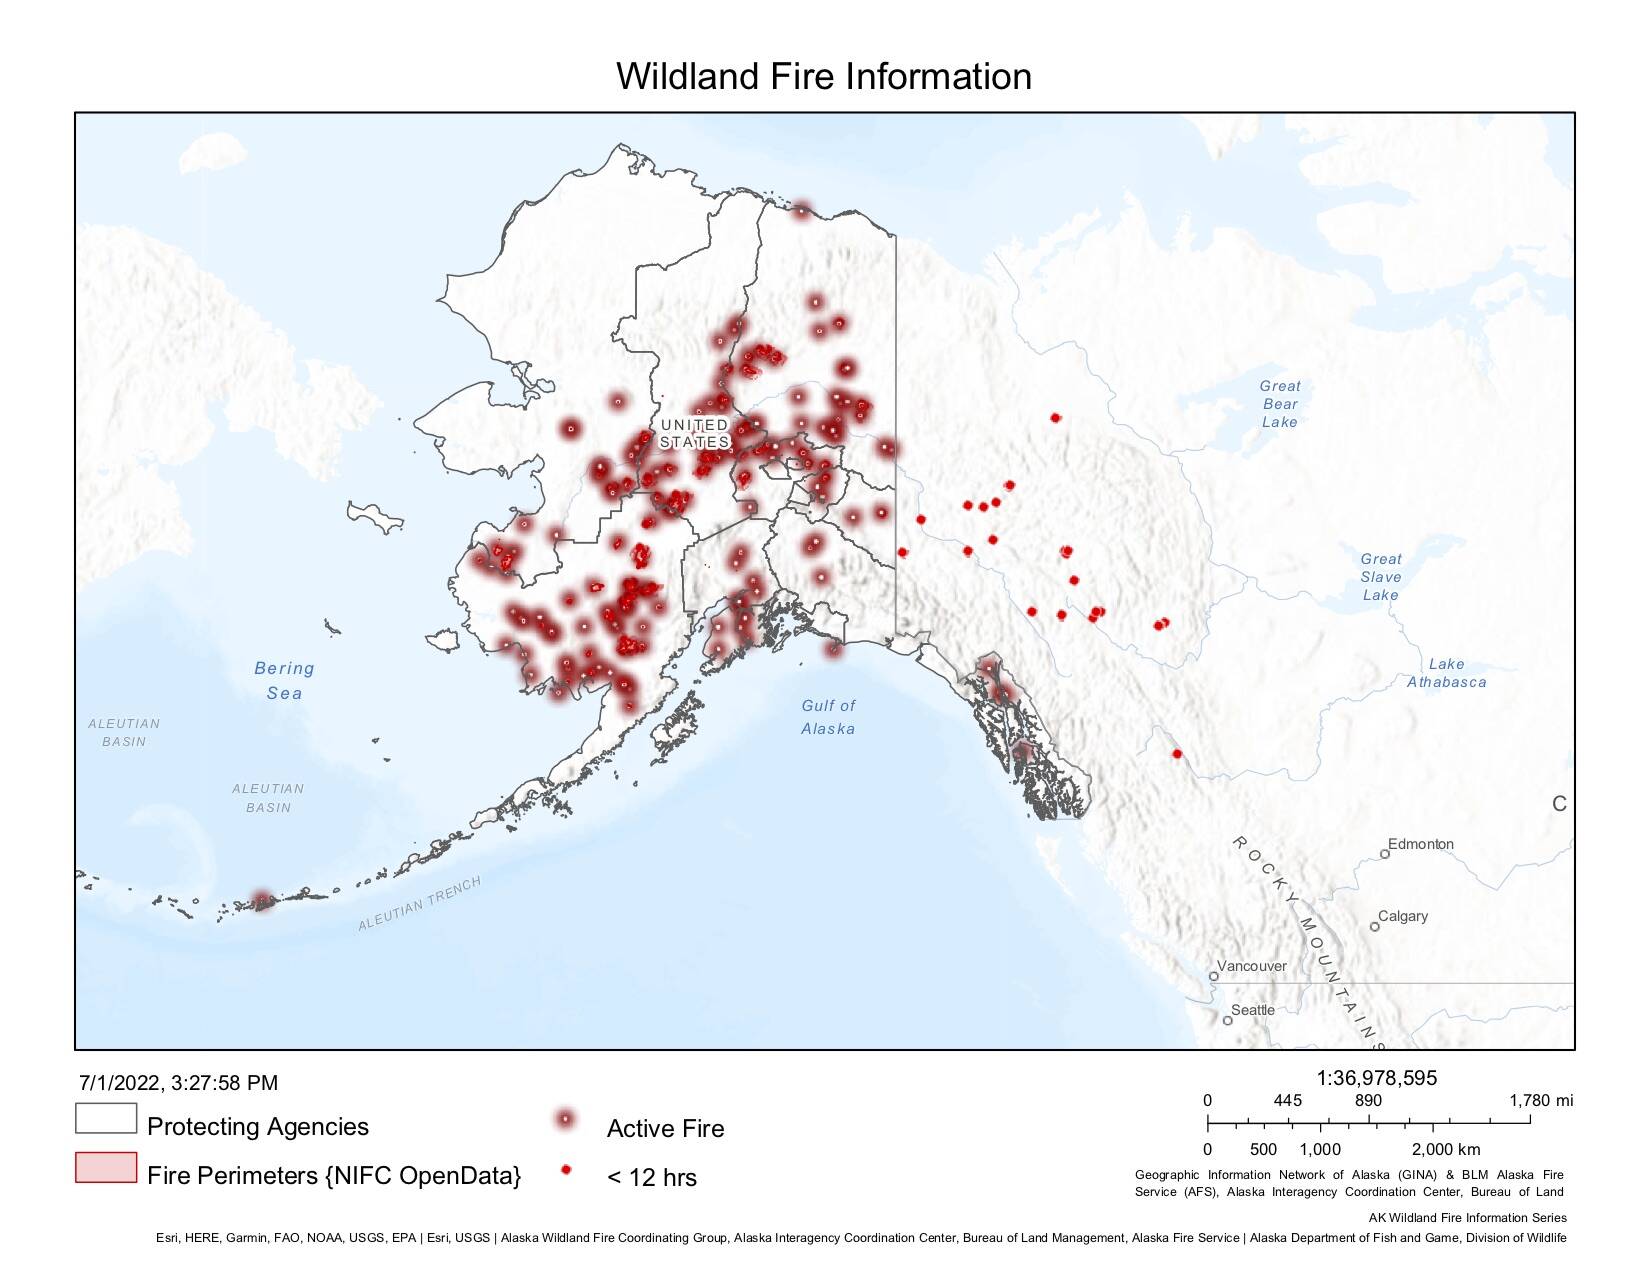 A map shows active fires around the state of Alaska on Friday, July 1, 2022. (Screenshot from Alaska Wildland Fire Information Map)